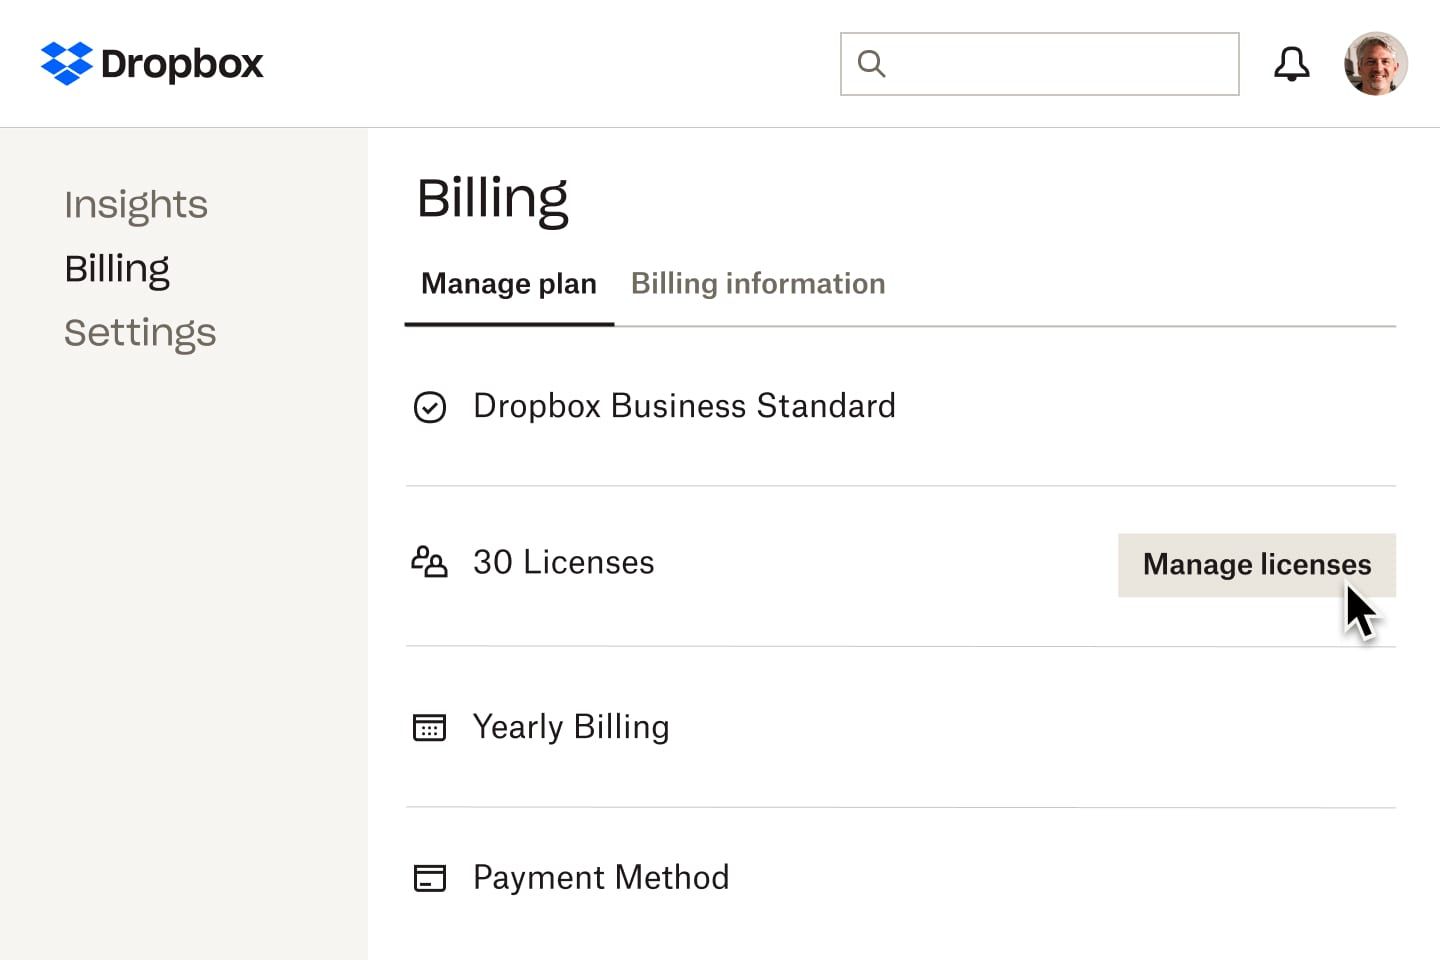 The Billing view in Dropbox that displays a user’s subscription type, how many licenses are associated with the account, the billing schedule, and the payment method